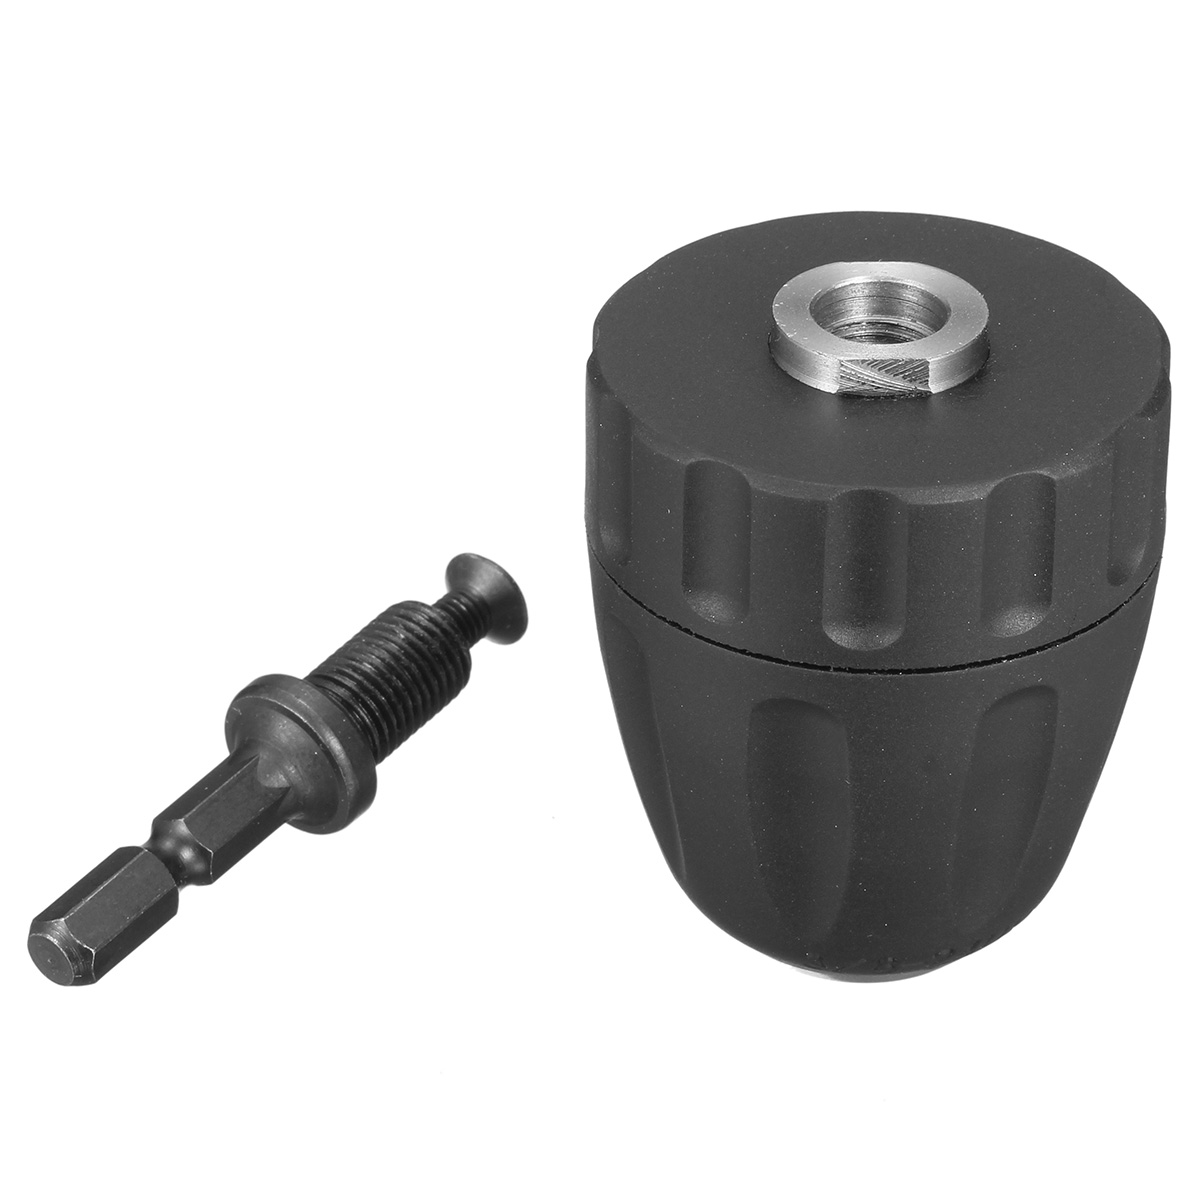 08-10mm-Keyless-Drill-Chuck-Converter-38-Inch-24UNF-with-14-Inch-Hex-Shank-SDS-Adapter-1160824-3